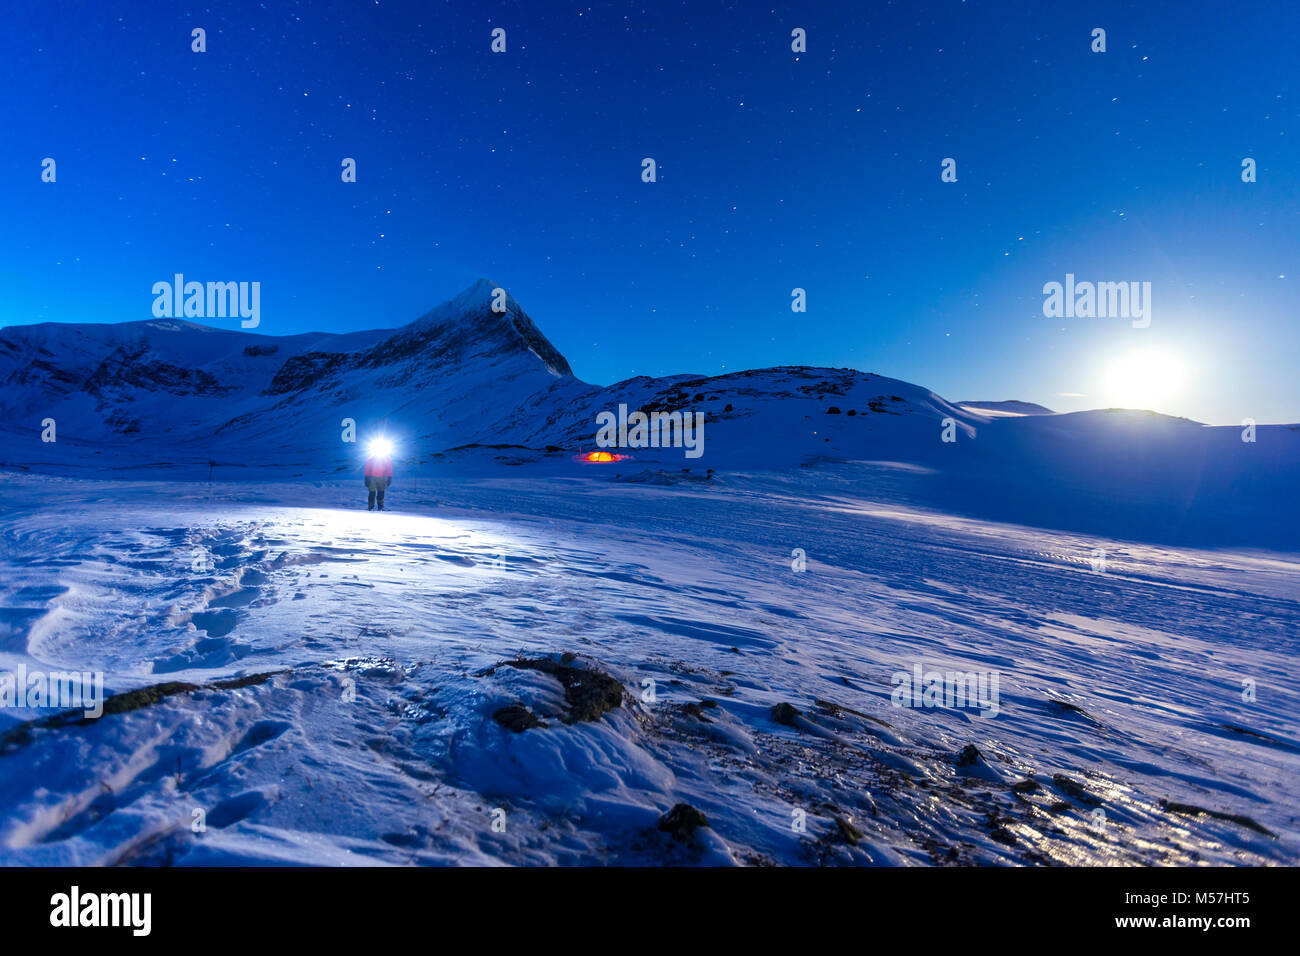 Person with tent on full moon in the snow,Kungsleden or king's trail,Province of Lapland,Sweden,Scandinavia Stock Photo